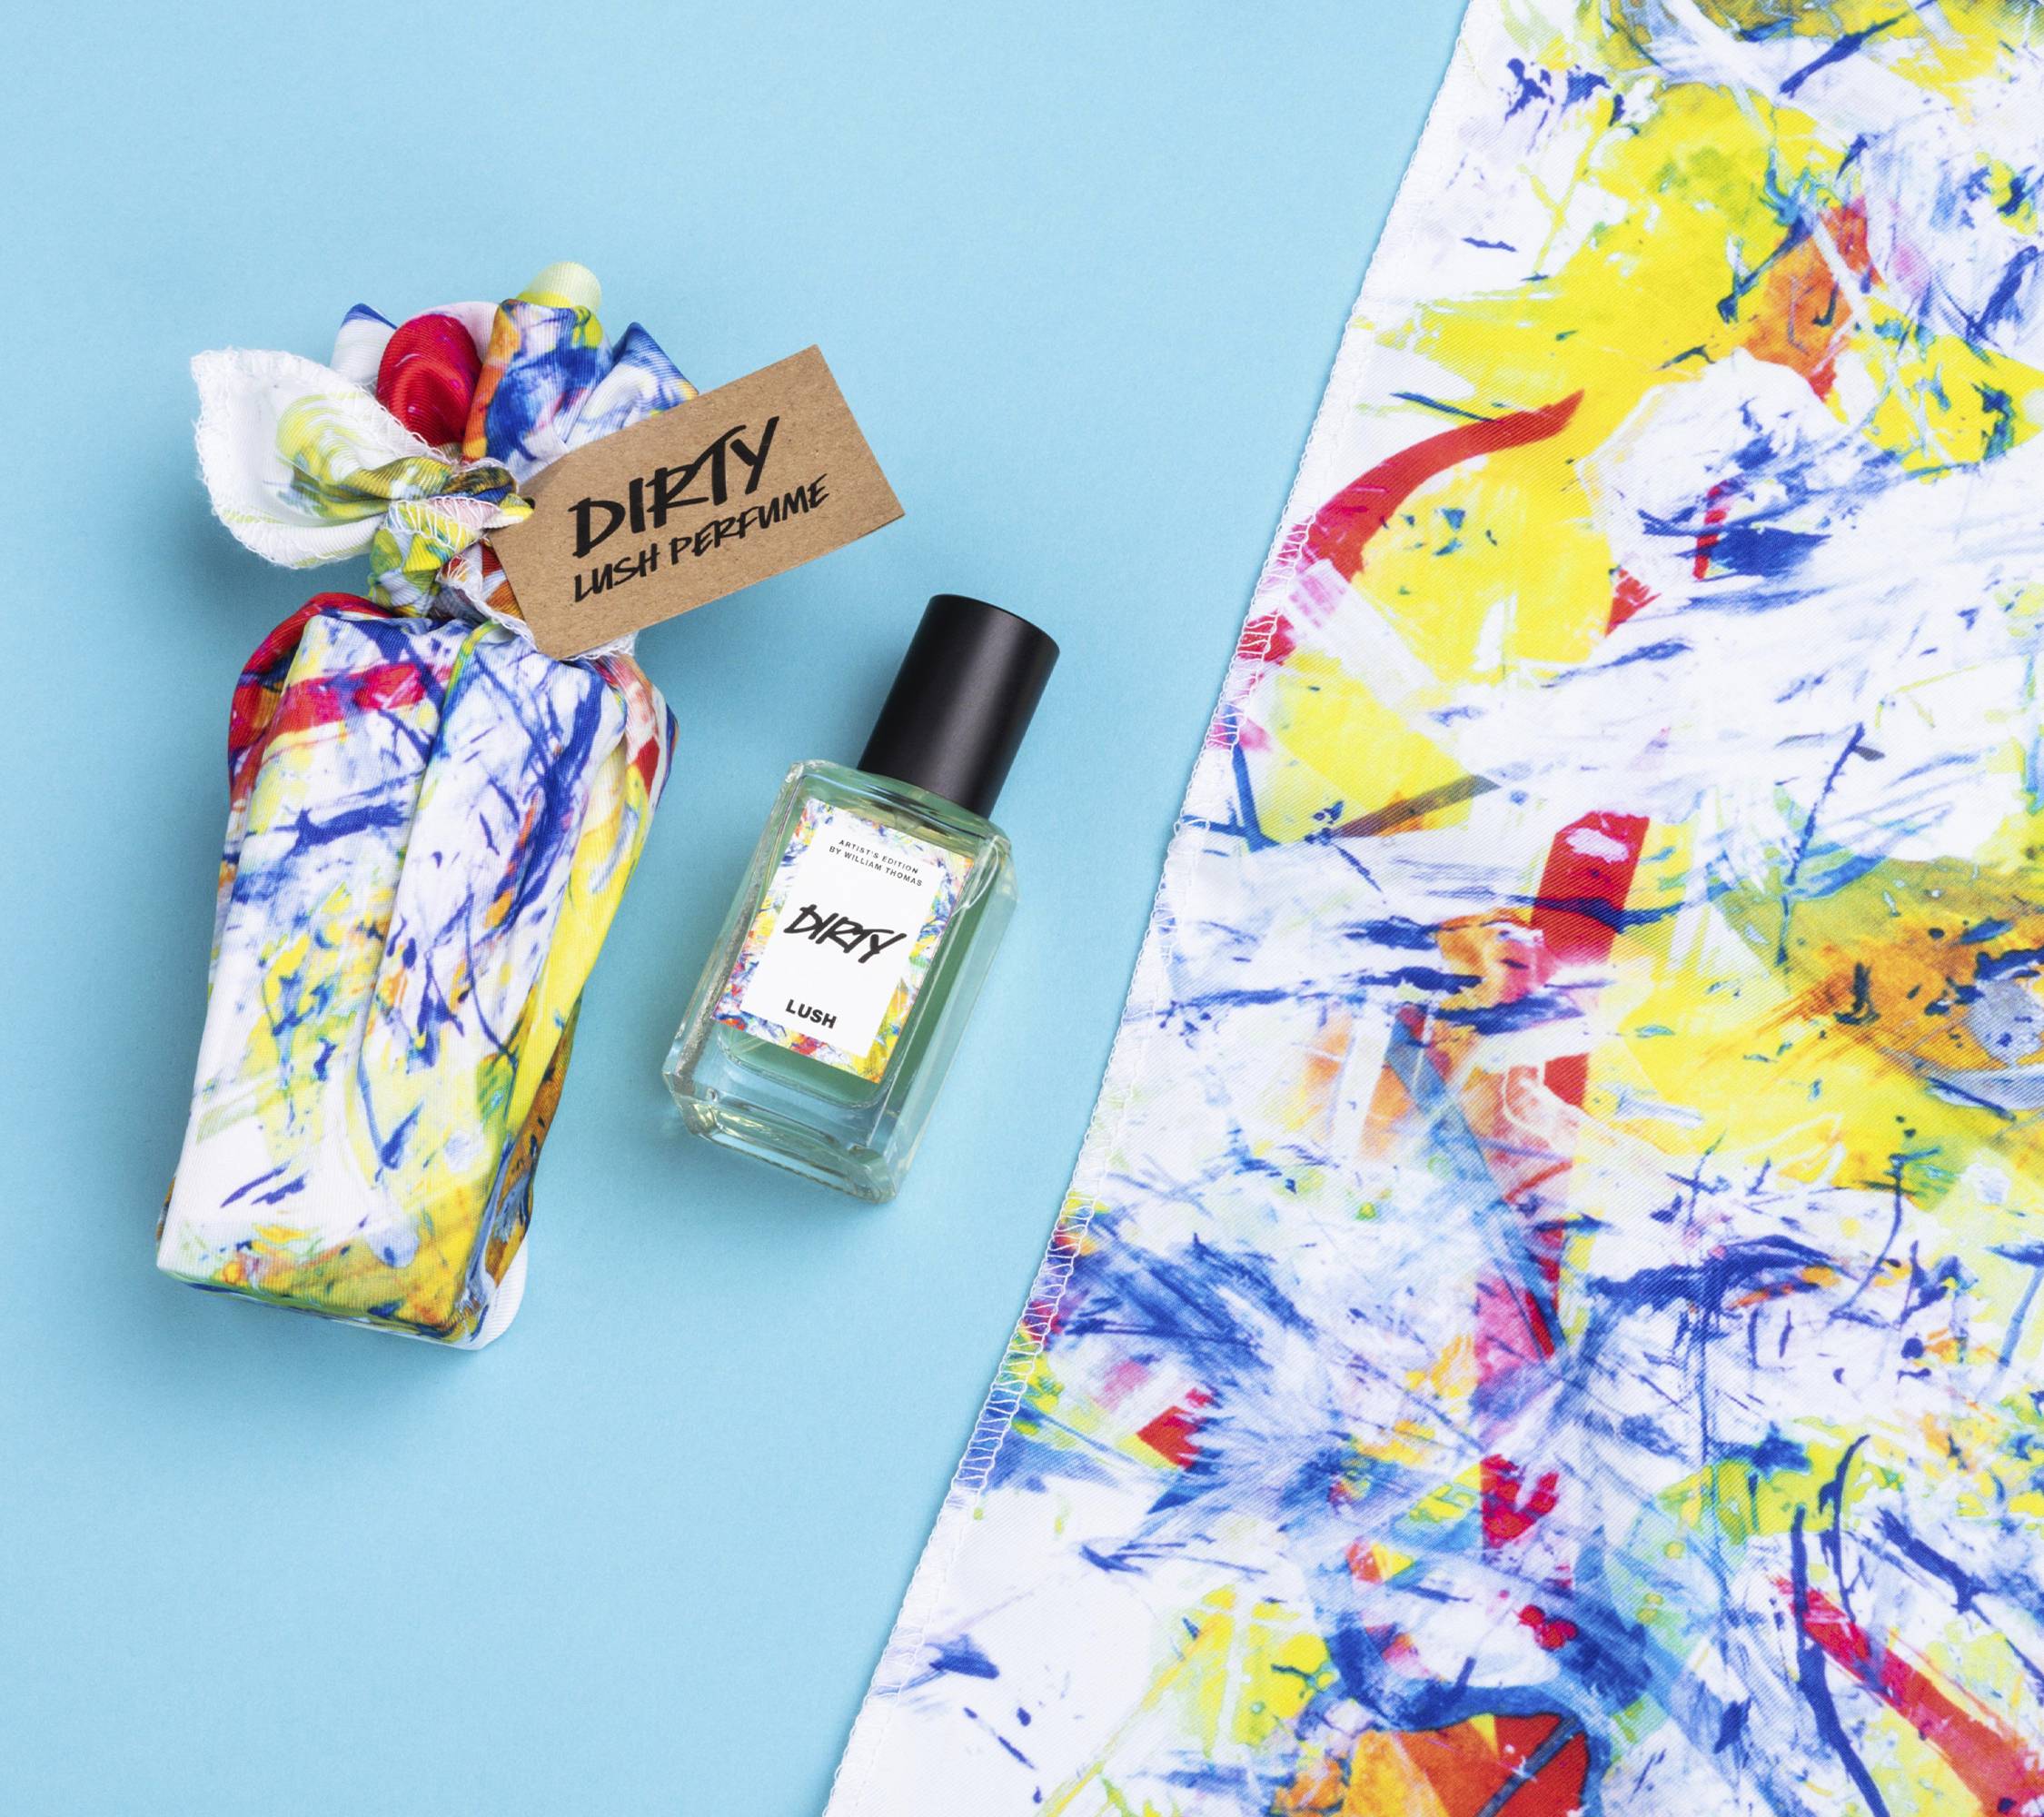 Dirty lies on a light blue background, alongside its two elements: a small bottle of Dirty perfume and a colourful knot wrap.